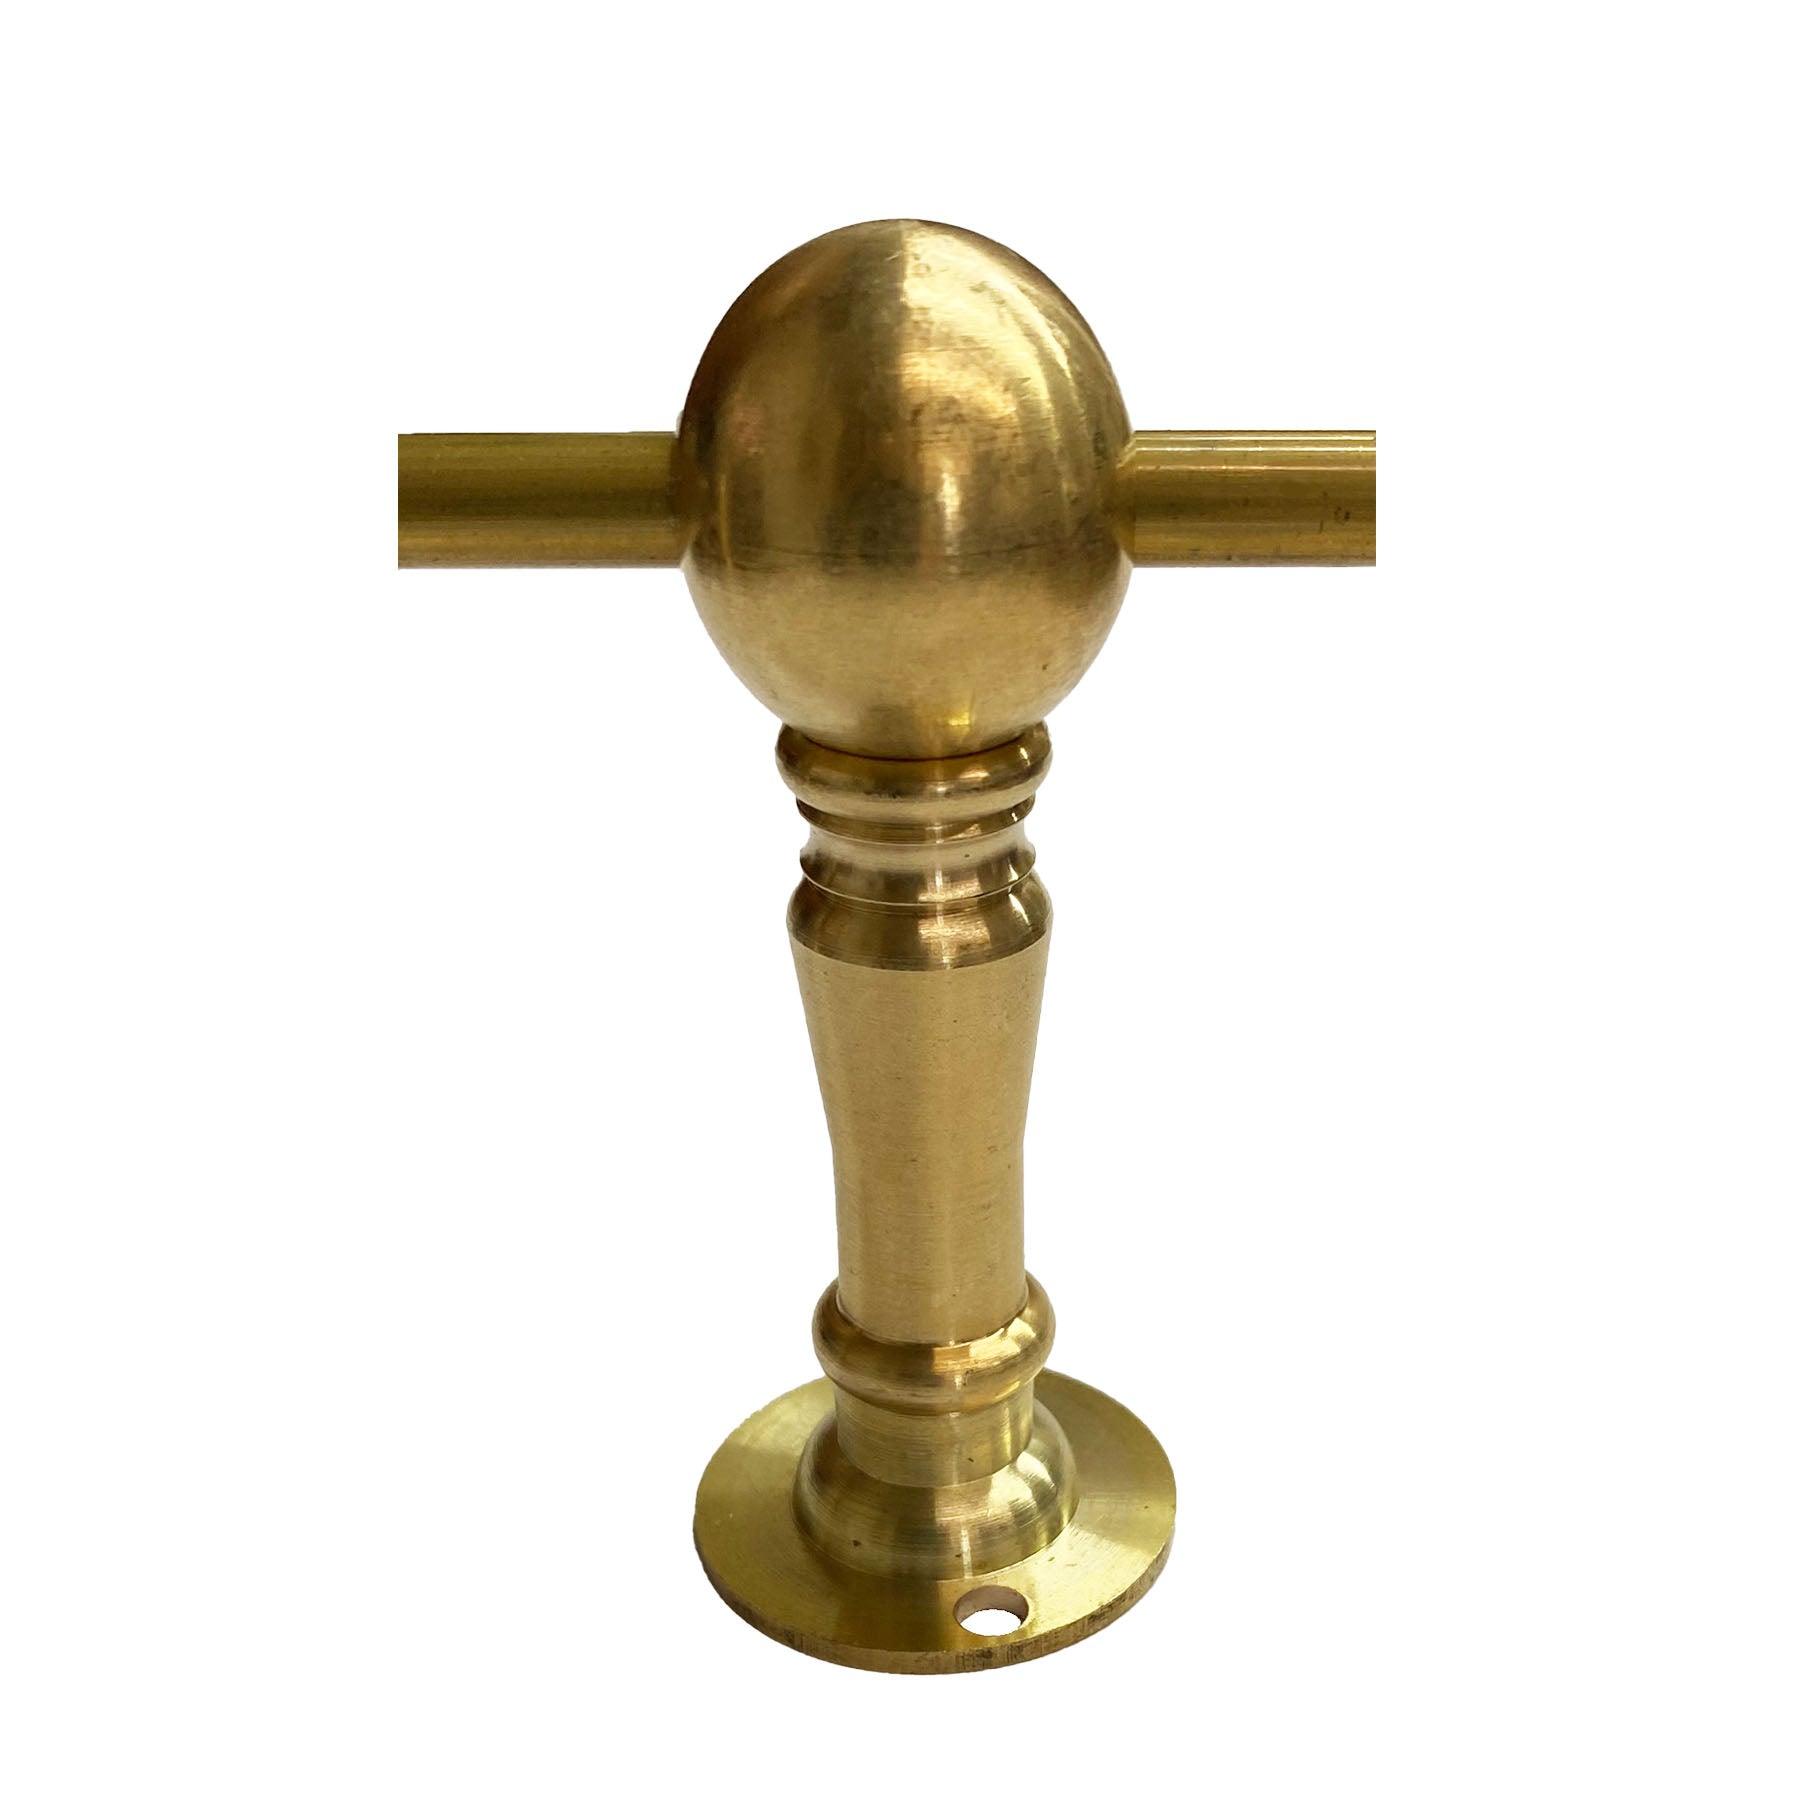 Polished Brass Chamberstick with Wooden Handle- Antique Vintage